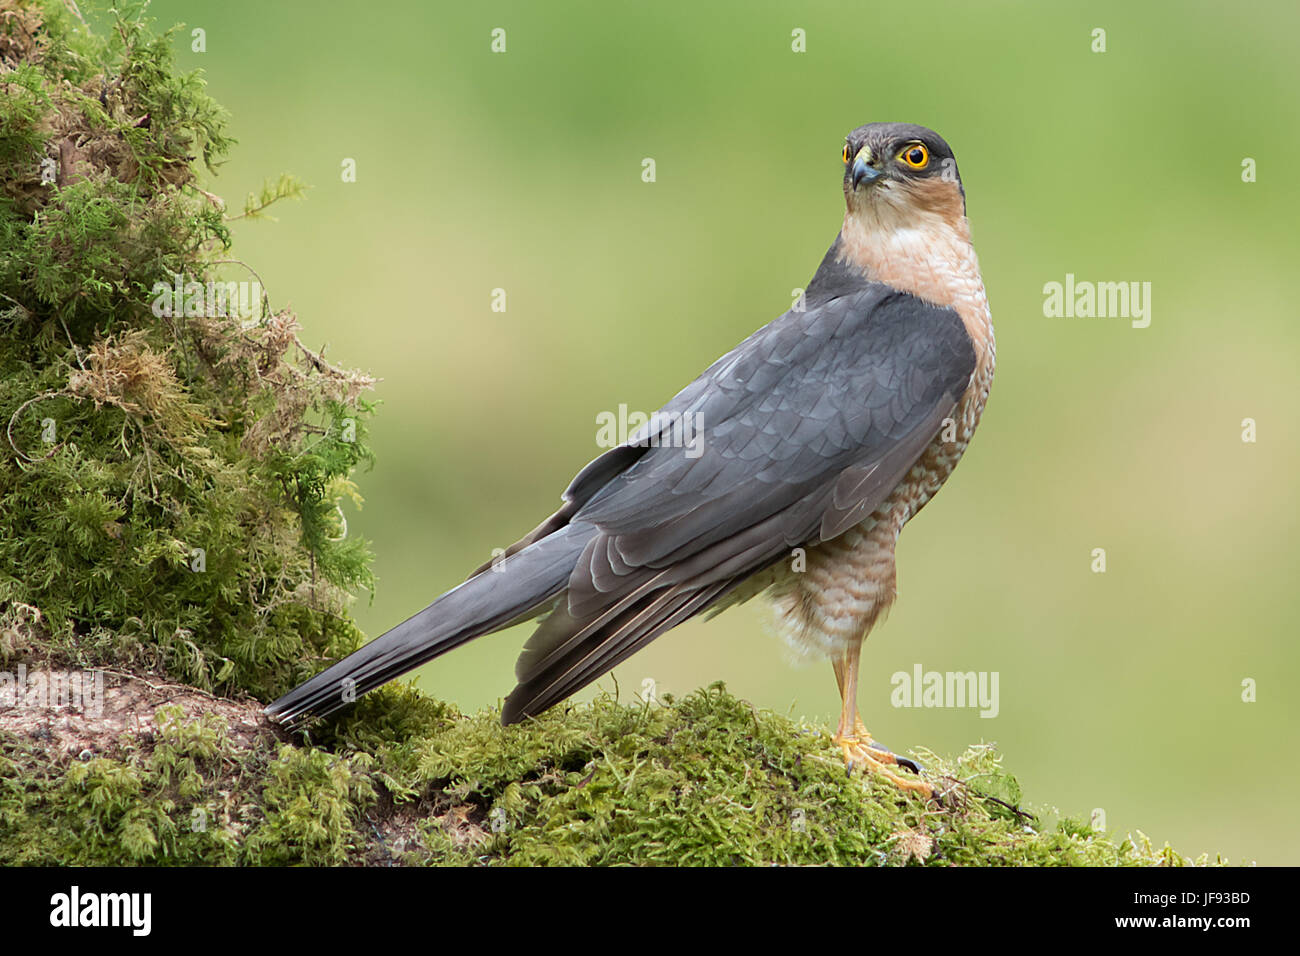 A male sparrowhawk stands alert toking behind and perched on an old moss covered tree branch. full length side view Stock Photo